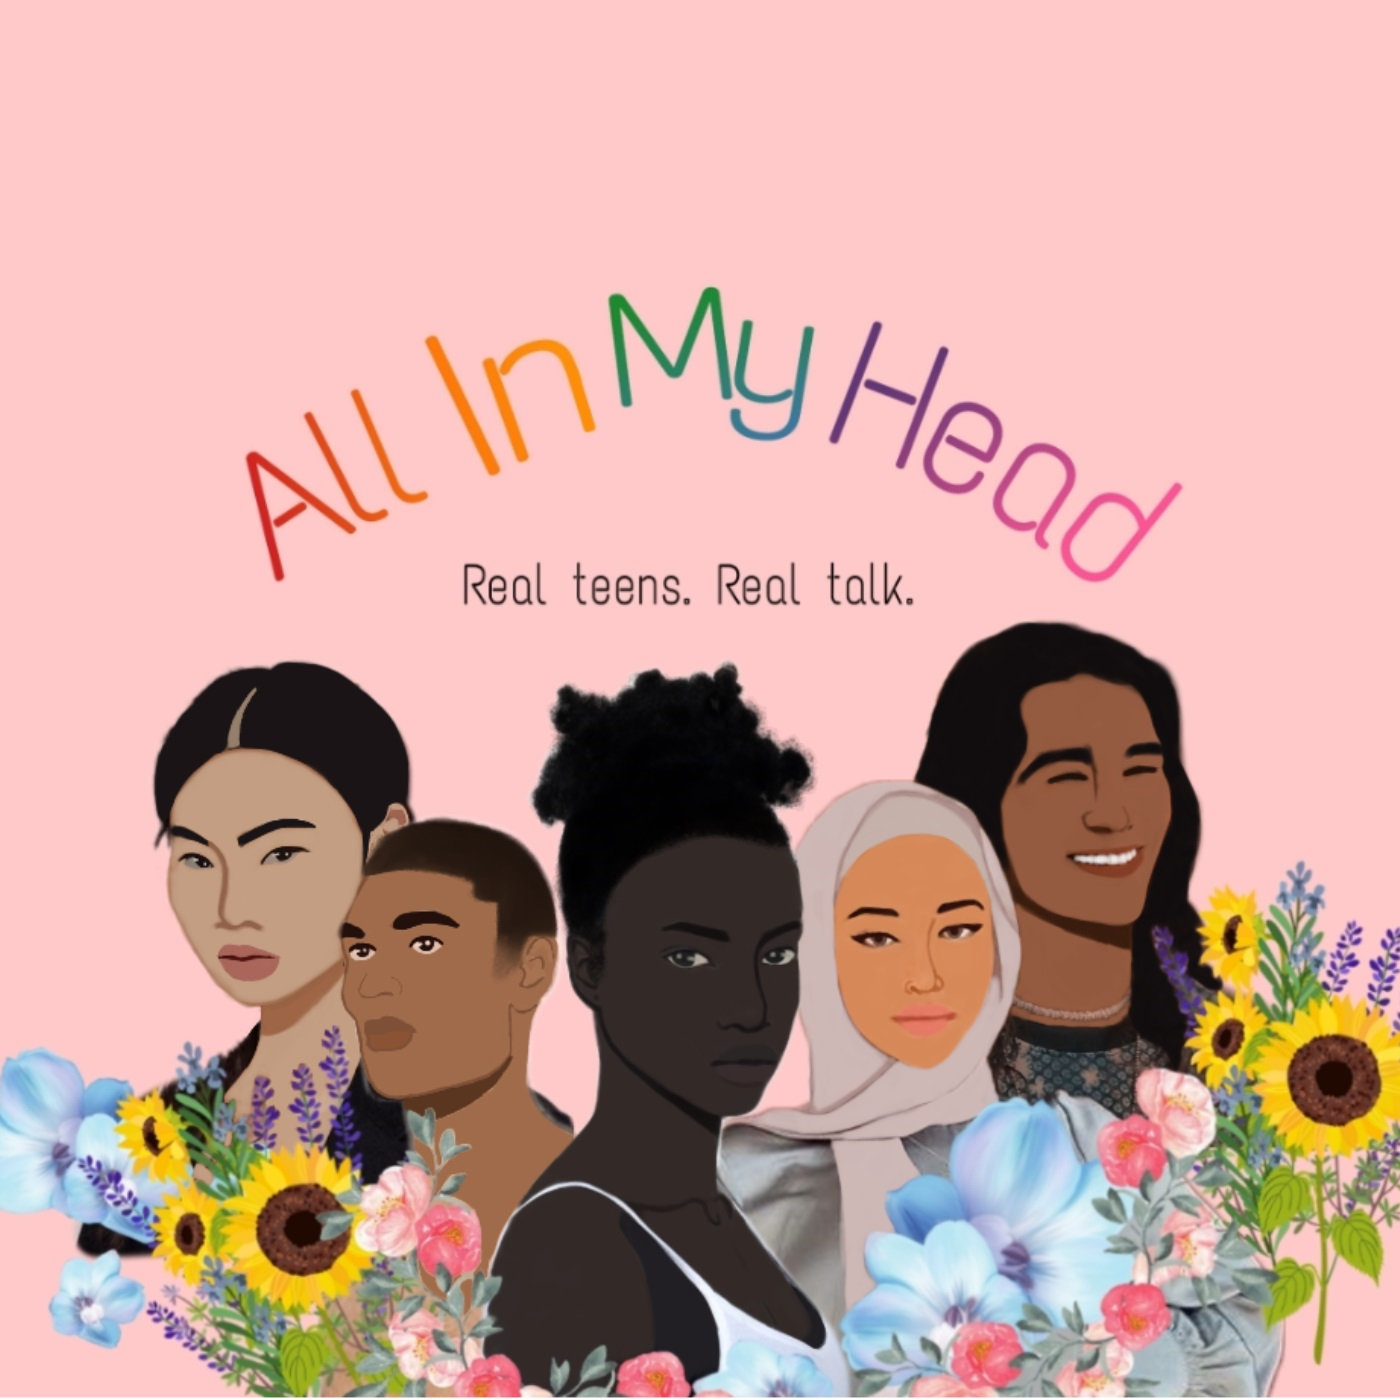 Illustration for All in my Head podcast displaying diverse group of individuals to depict inclusion.